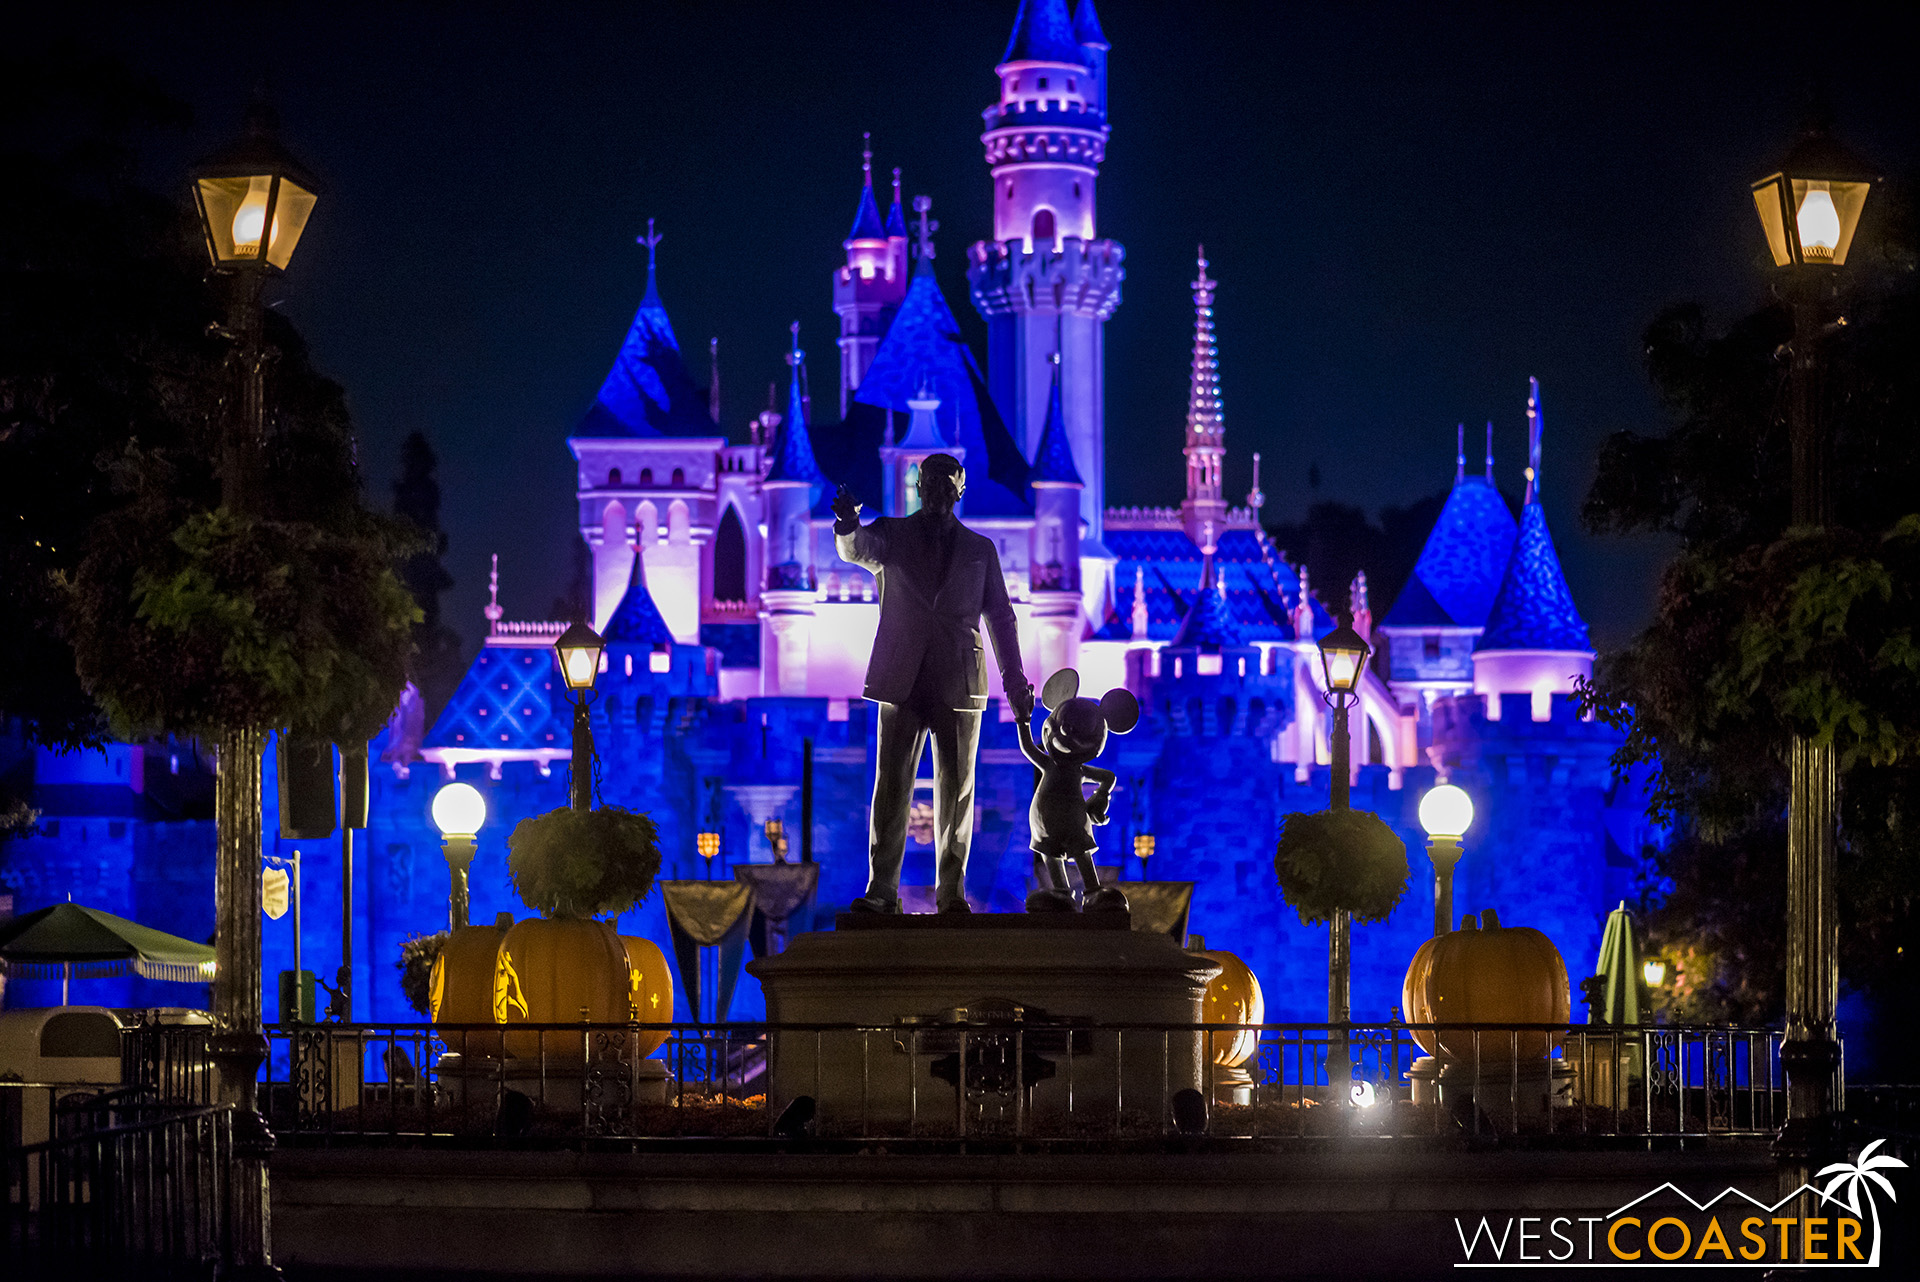  The lights were off the Partners Statue last Friday and before then, but there’s something a bit col to see Walt and Mickey in silhouette, illuminated only by the glow of the backlighting. 